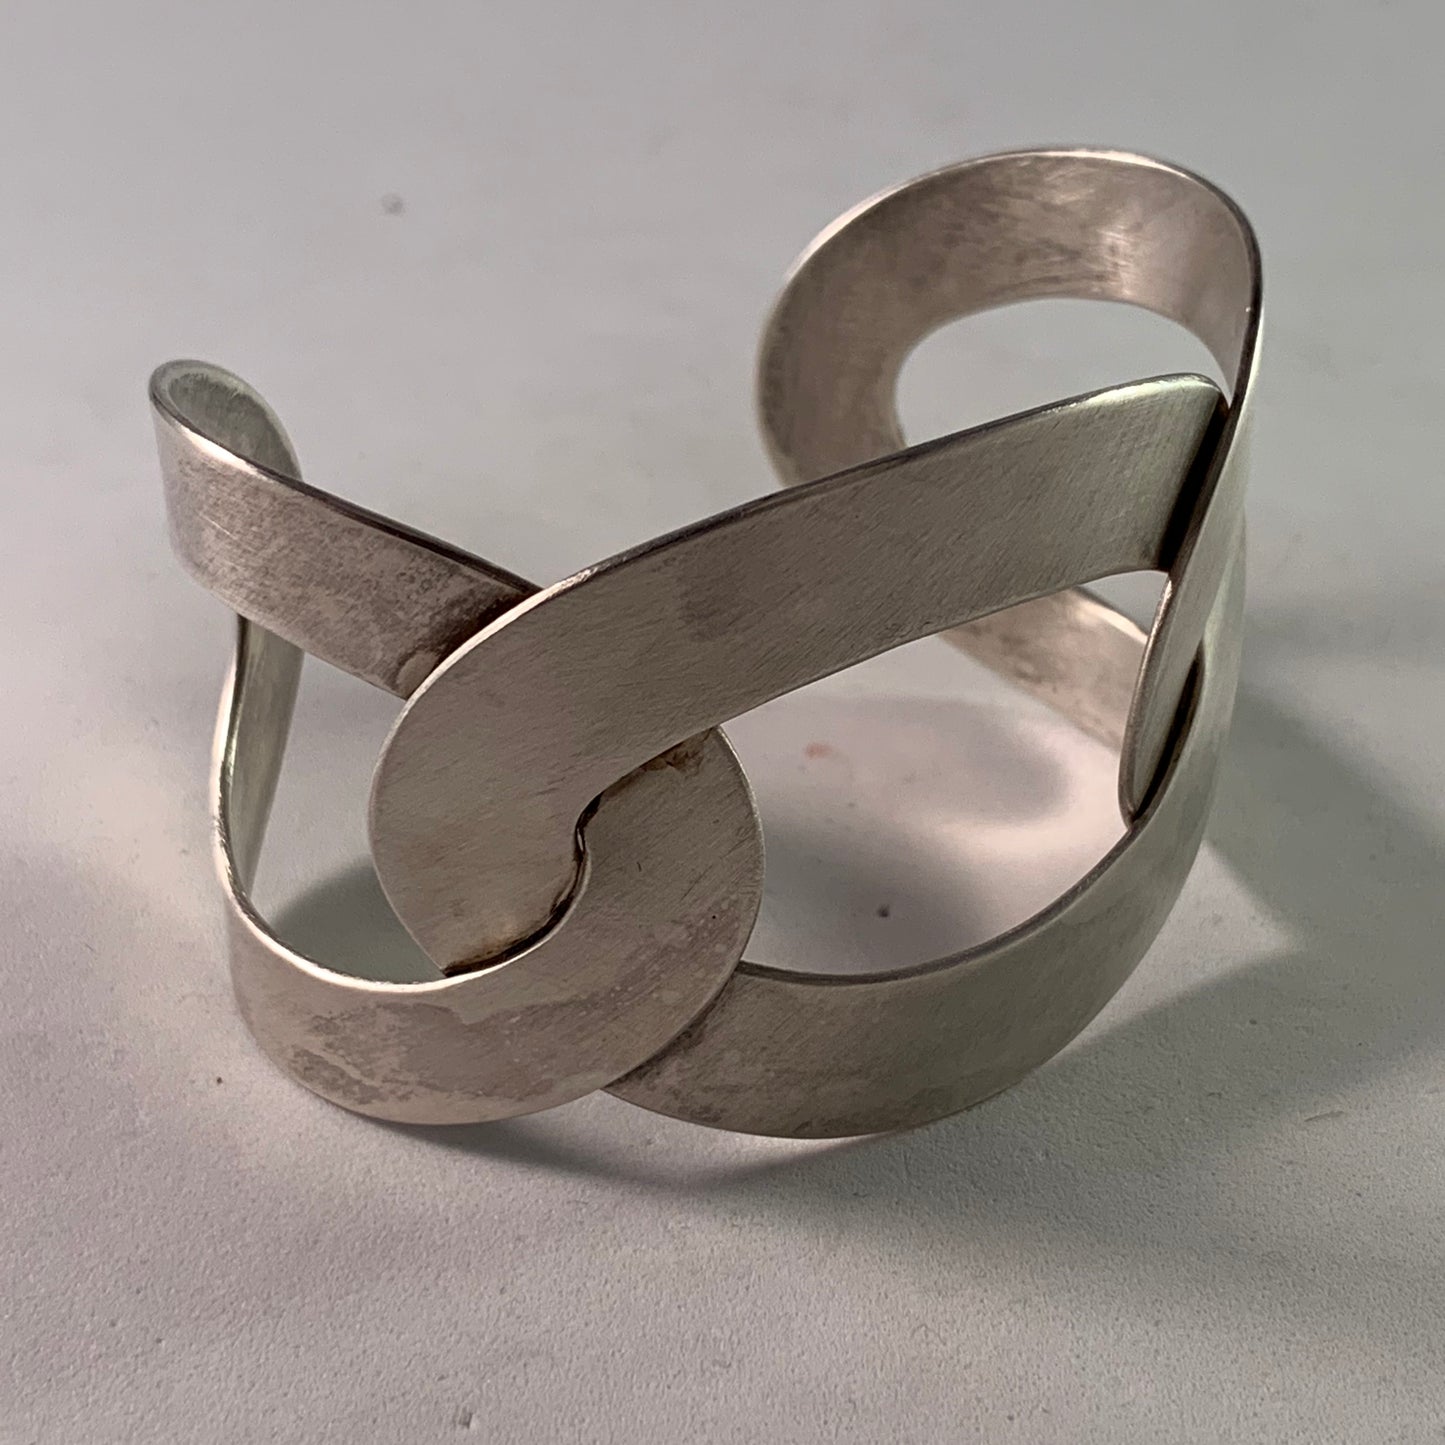 Milano, Italy Vintage Sterling Silver Cuff Bracelet.